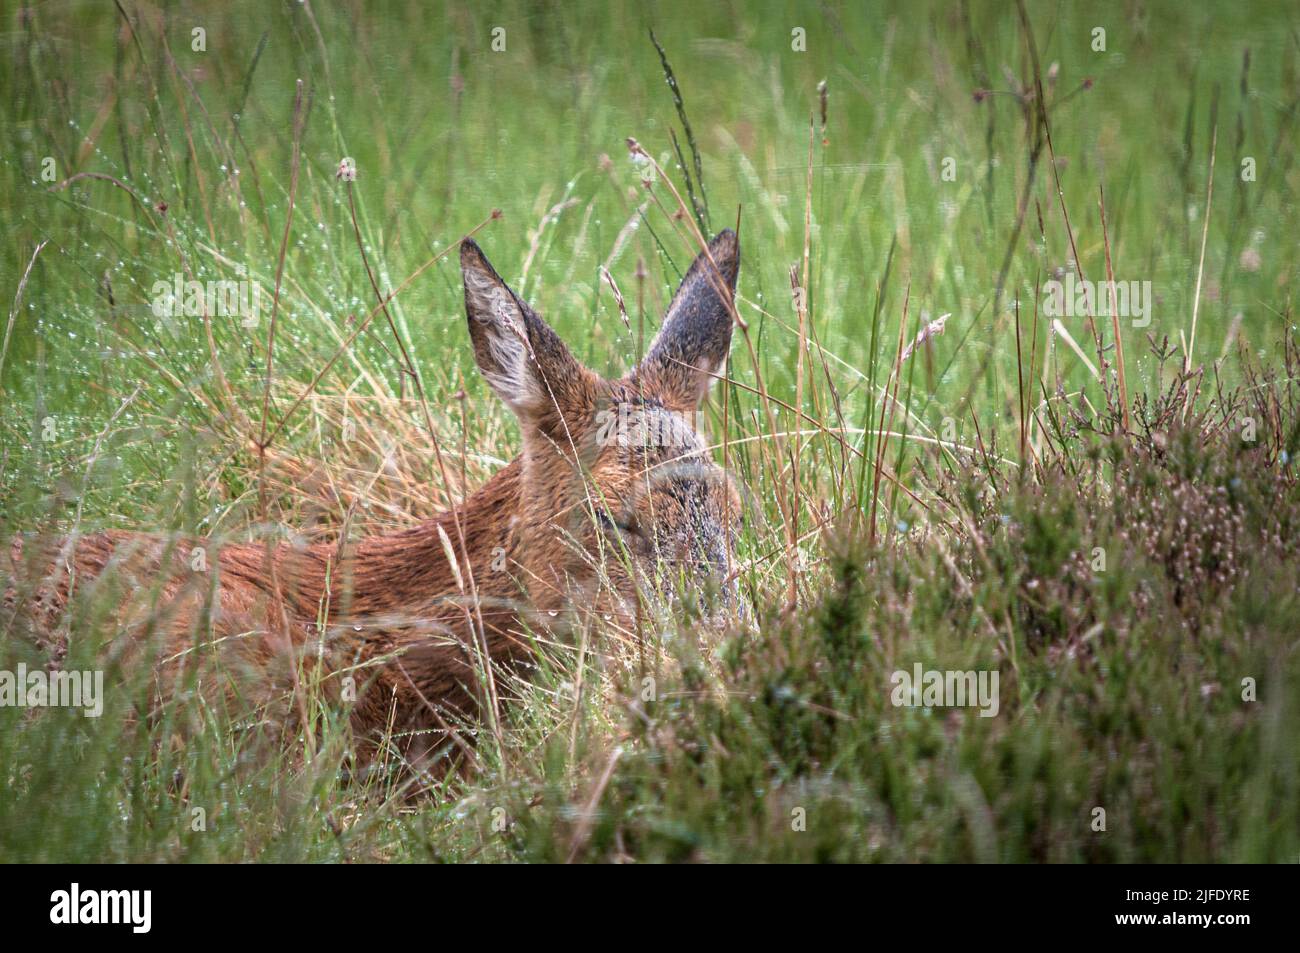 A summer close HDR image of a solitary Red Deer calf, Cervus elaphus scoticus, in grassland, Strathnairn, Scotland. 30 May 2022 Stock Photo